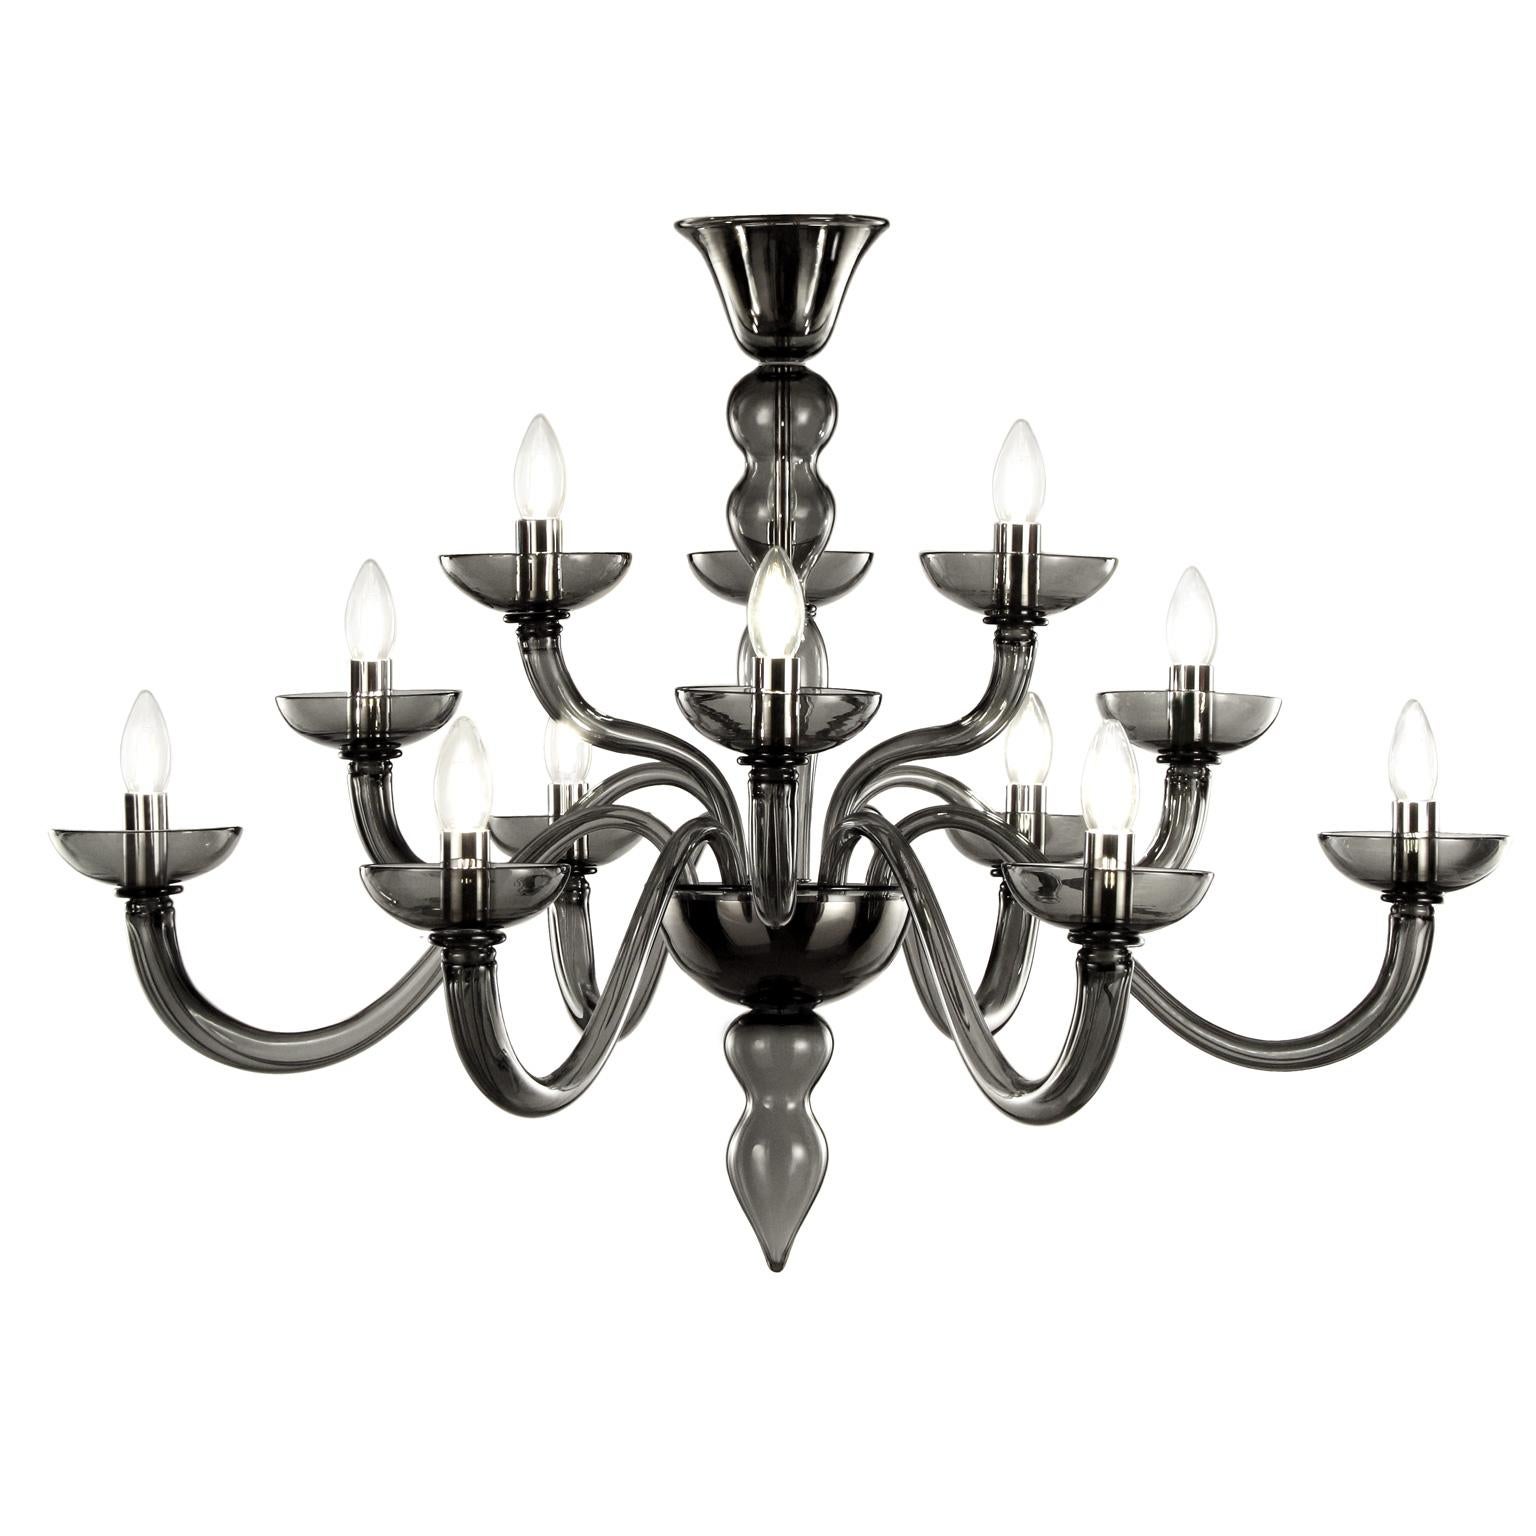 Metropole chandelier with 12 lights staggered in 3 levels. Artistic blown dark grey Murano glass.
Metropole is a modern Murano glass chandelier characterised by an essential design and perfectly balanced shapes. This classic chandelier has been